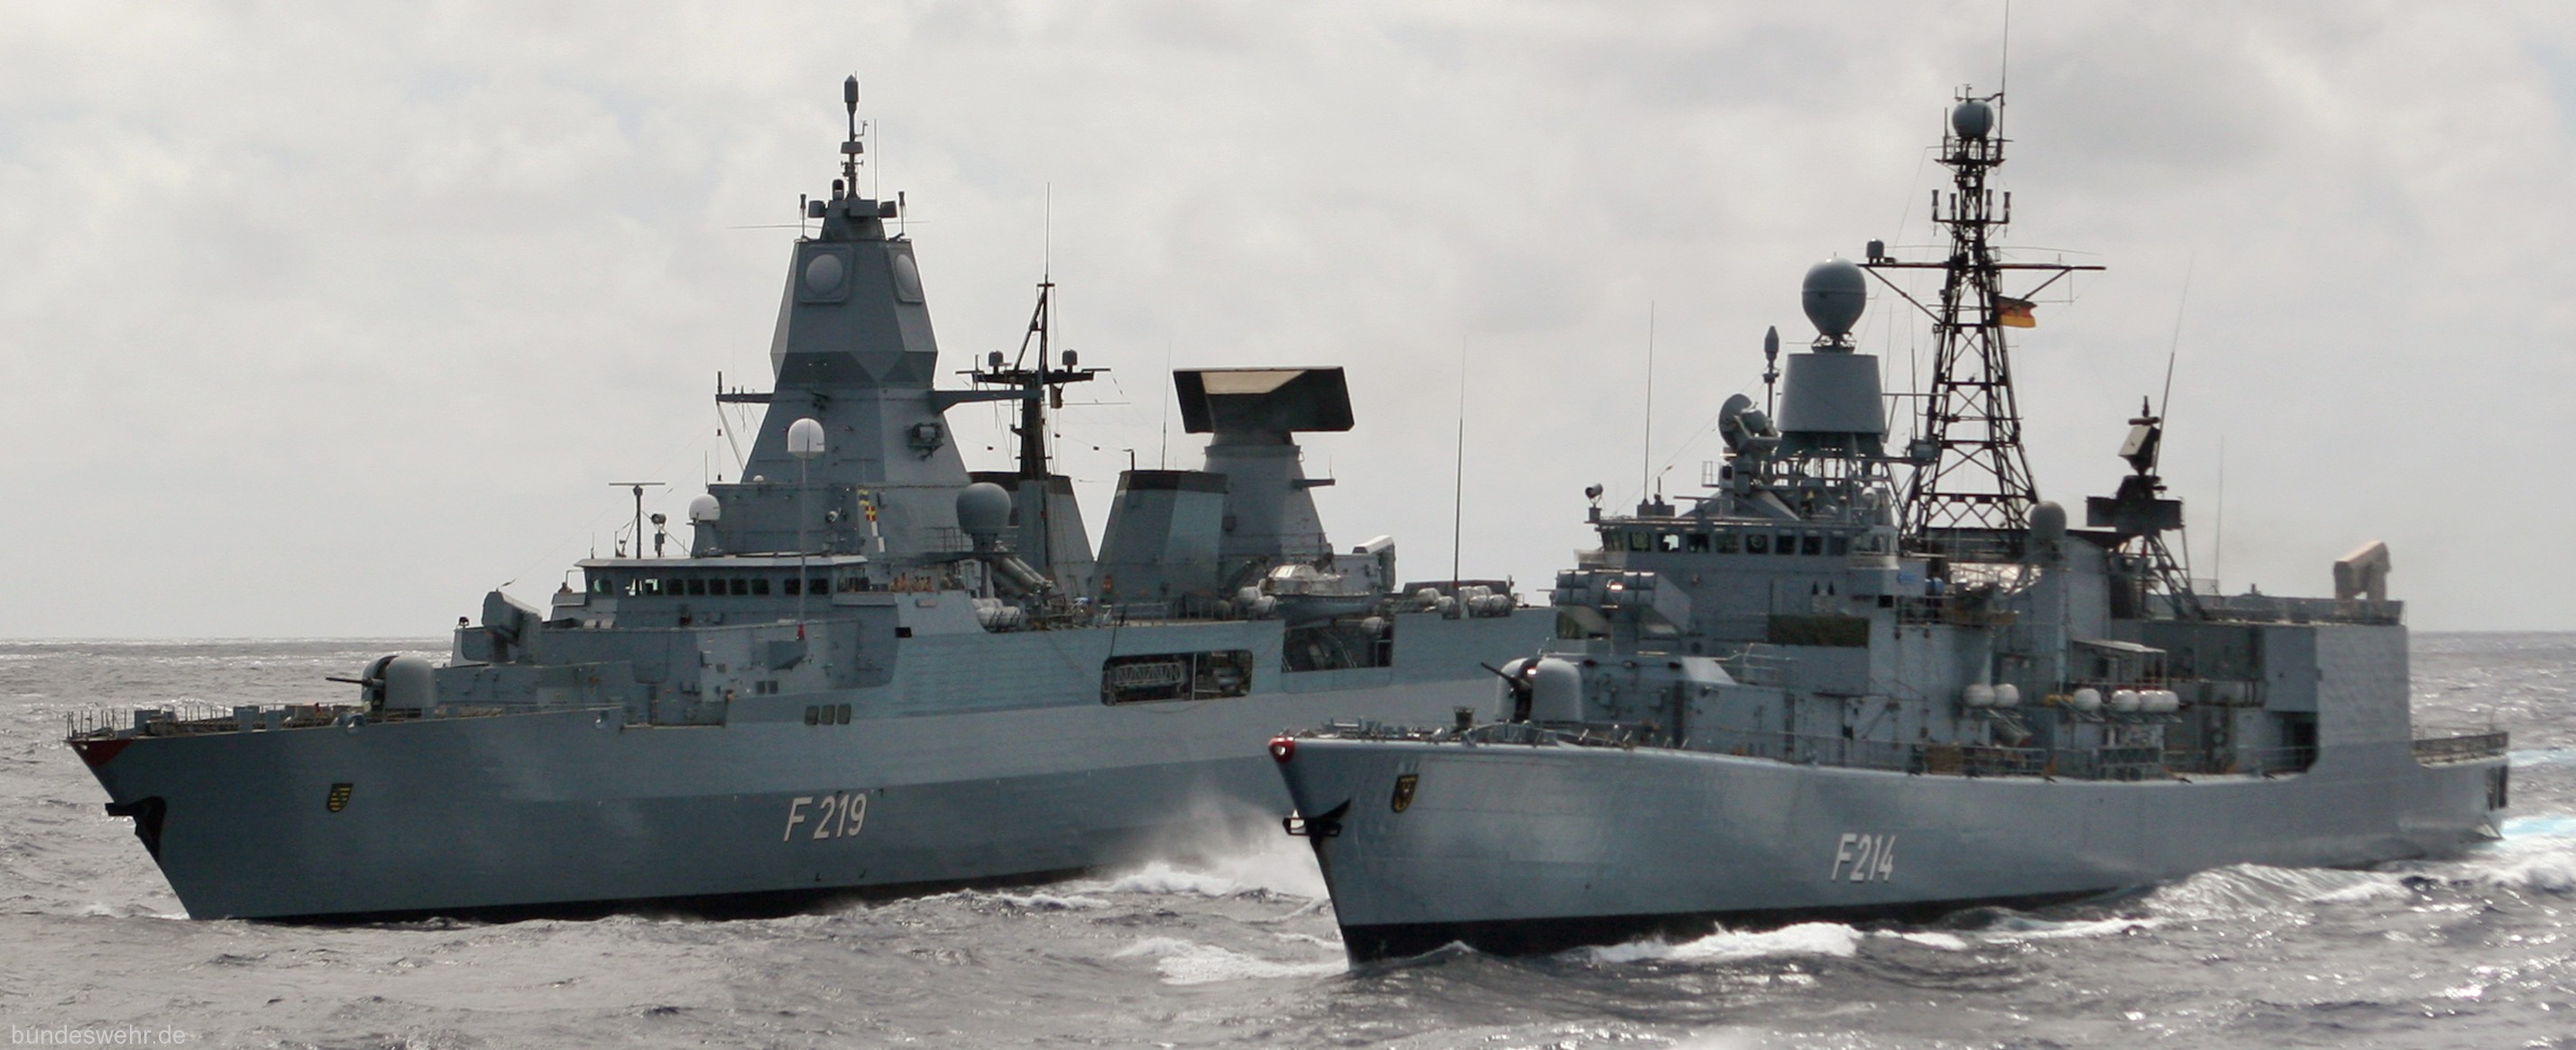 f-219 fgs sachsen type 124 class guided missile frigate ffg german navy 23